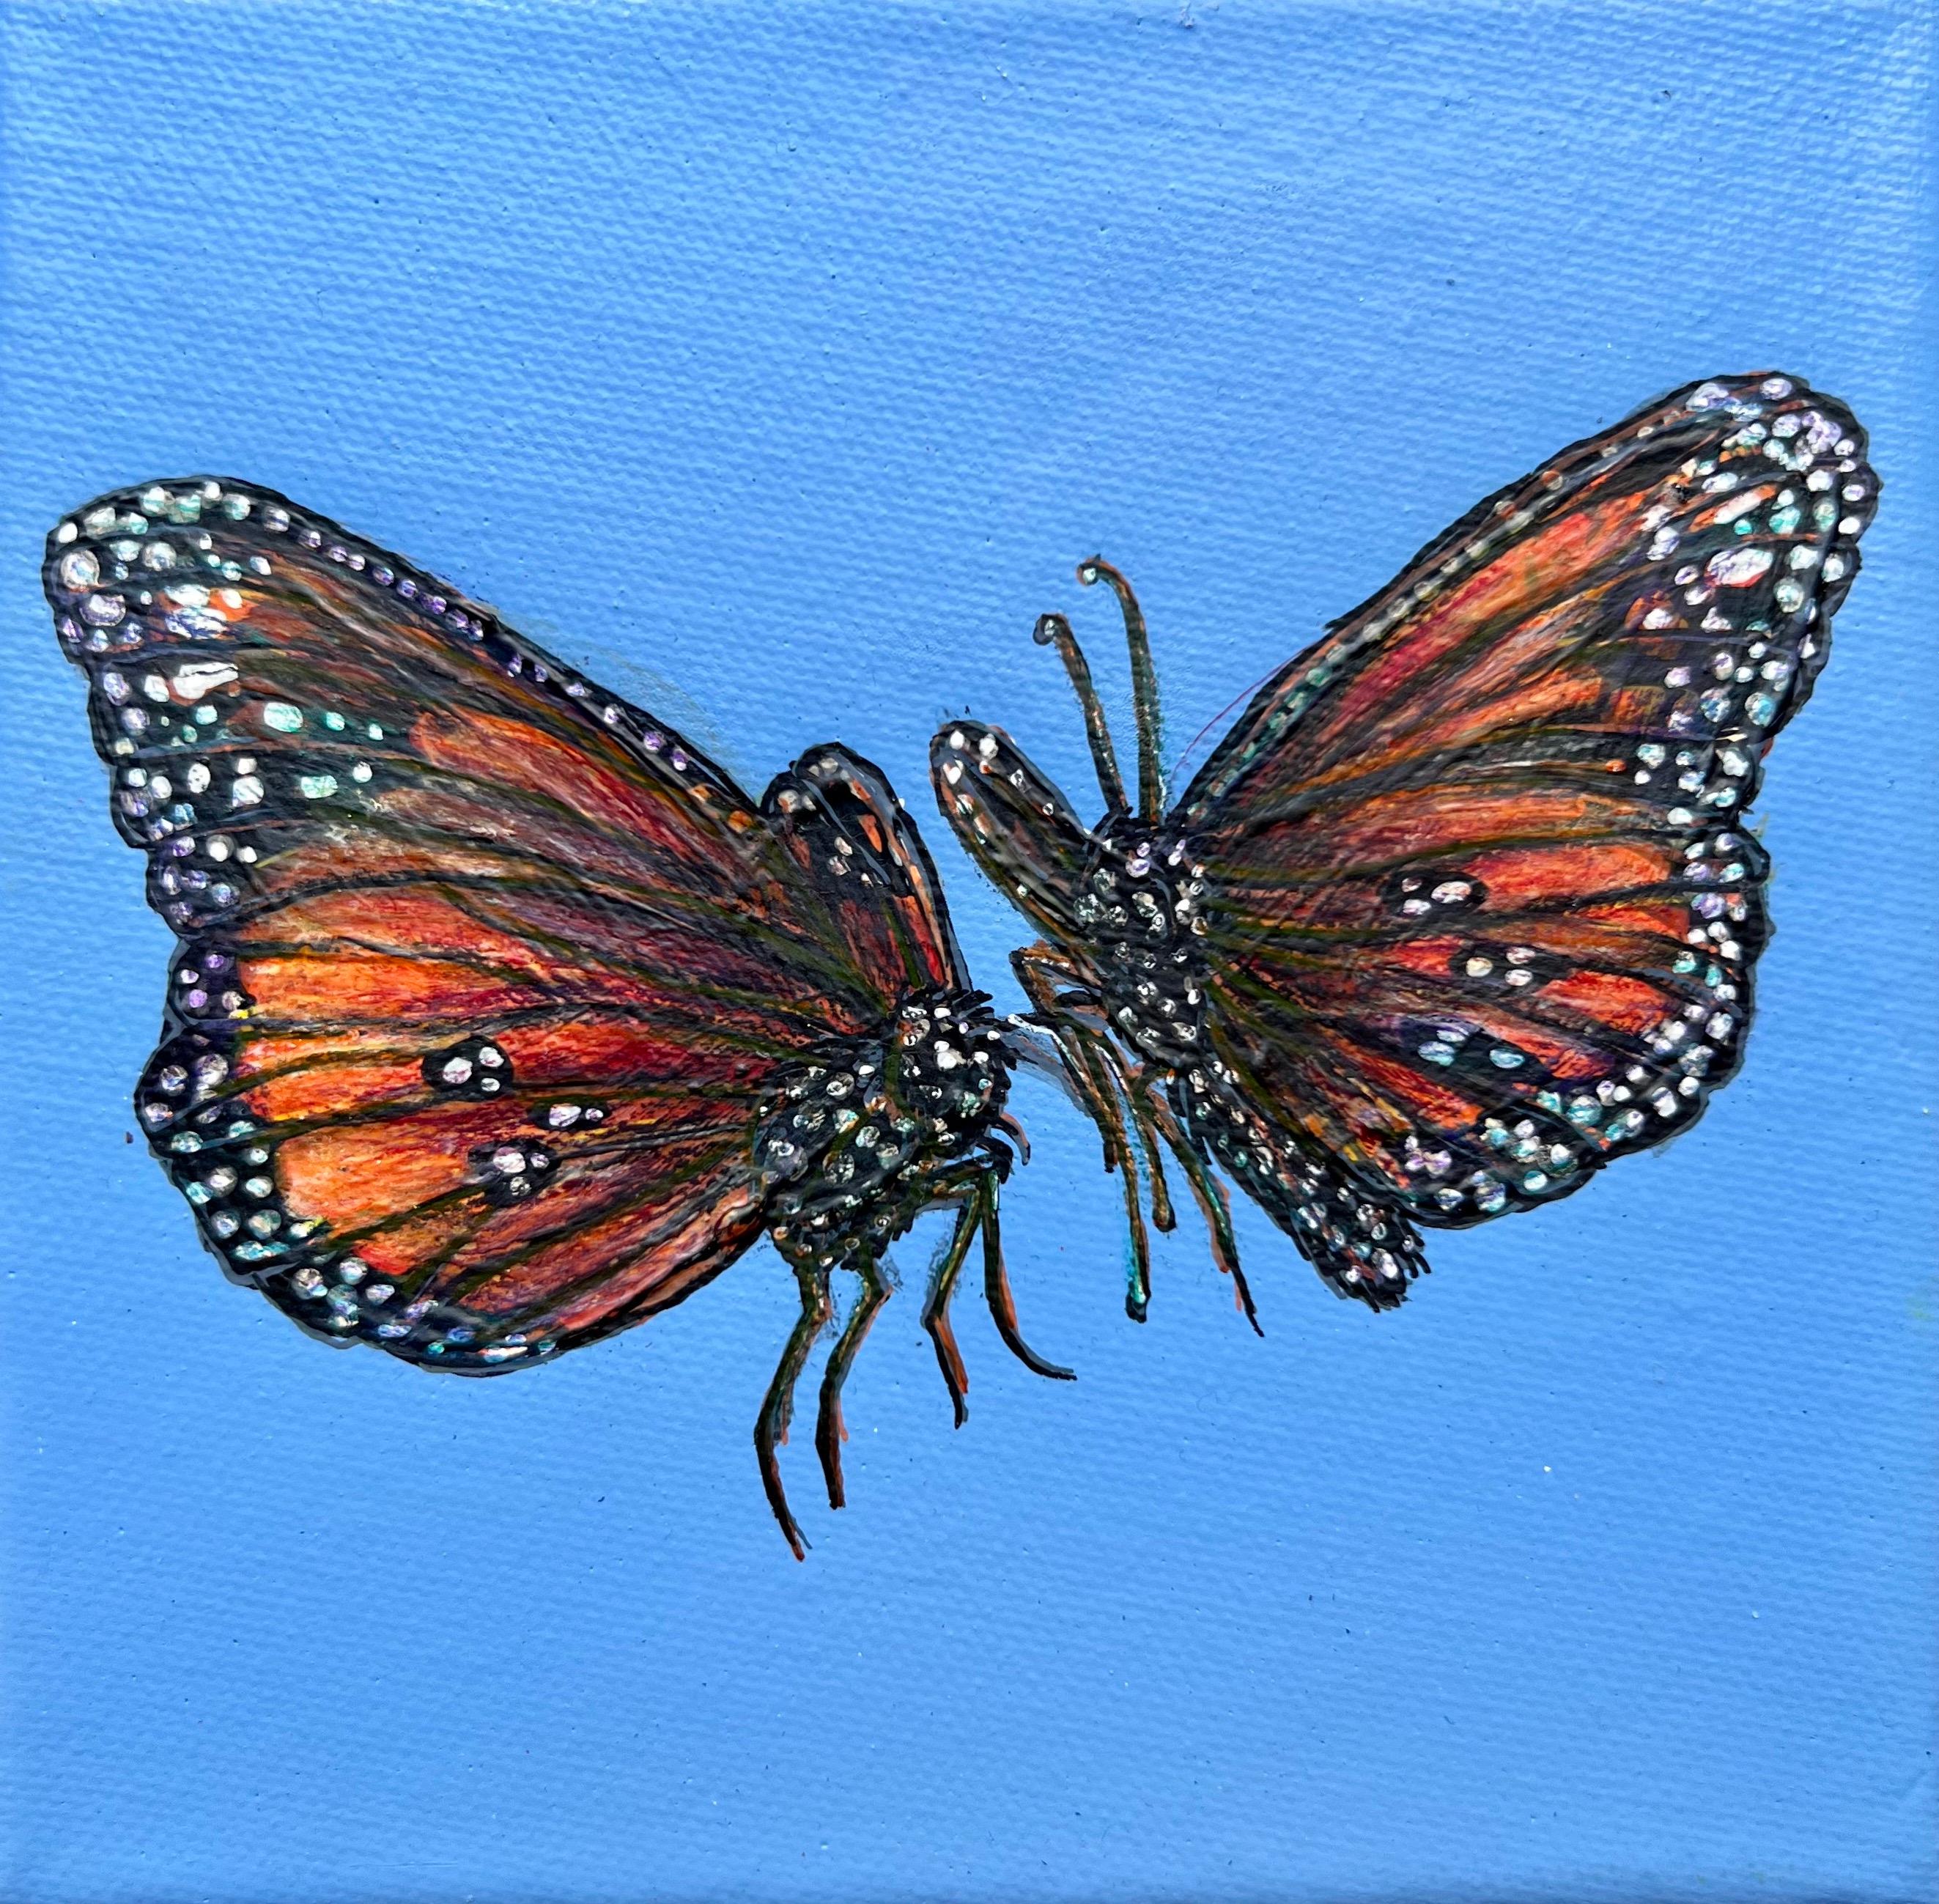 Mandii Pope Figurative Painting - Ascension Sky- butterfly blue contemporary realism negative space acrylic paint